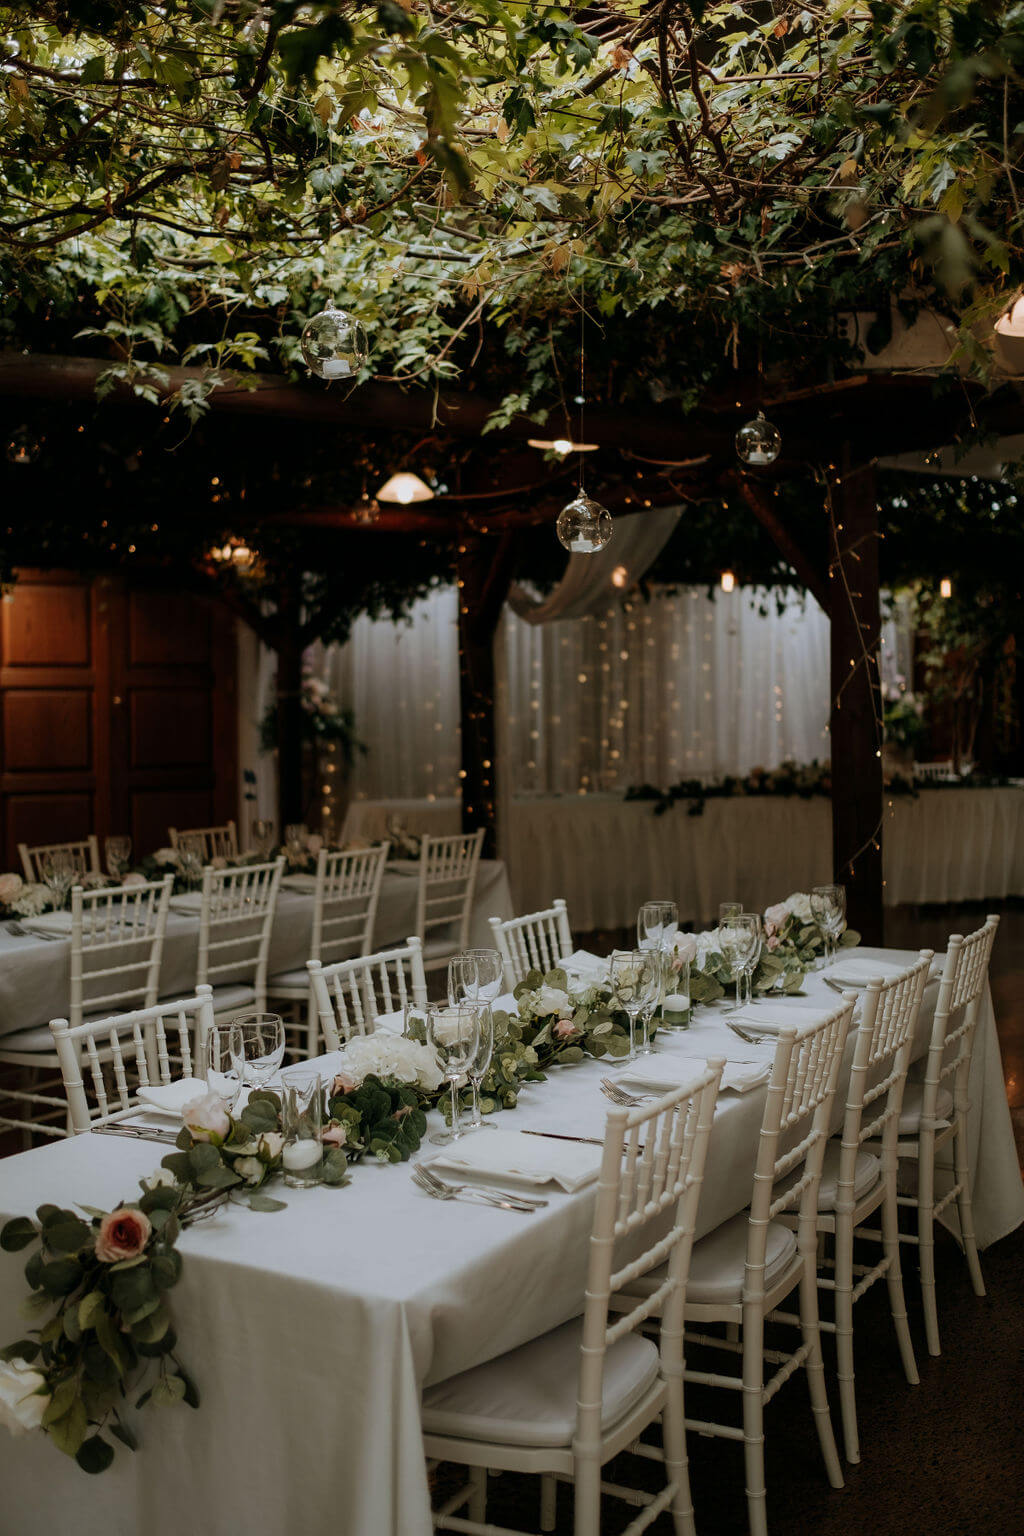 Markovina Vineyard Wedding Reception - white tables and chairs